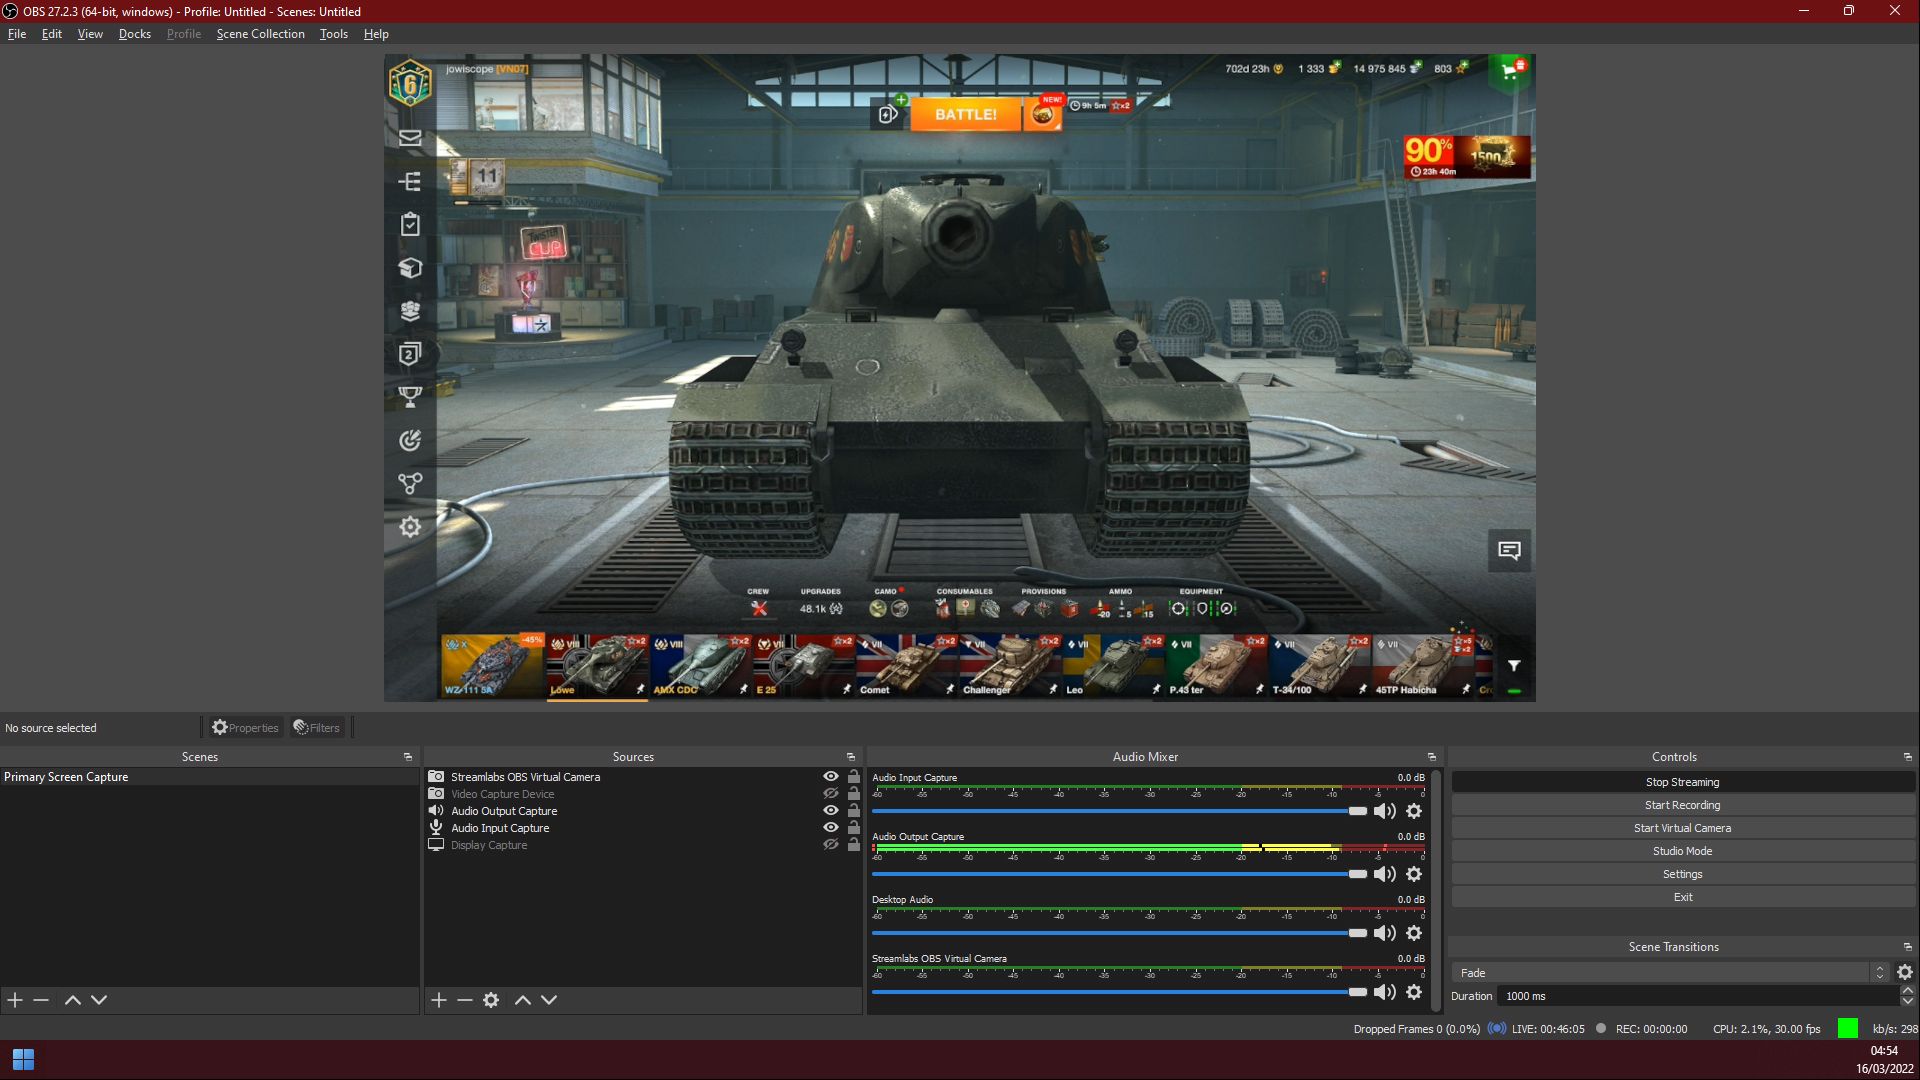 Setting Up OBS Studio With World of Tanks